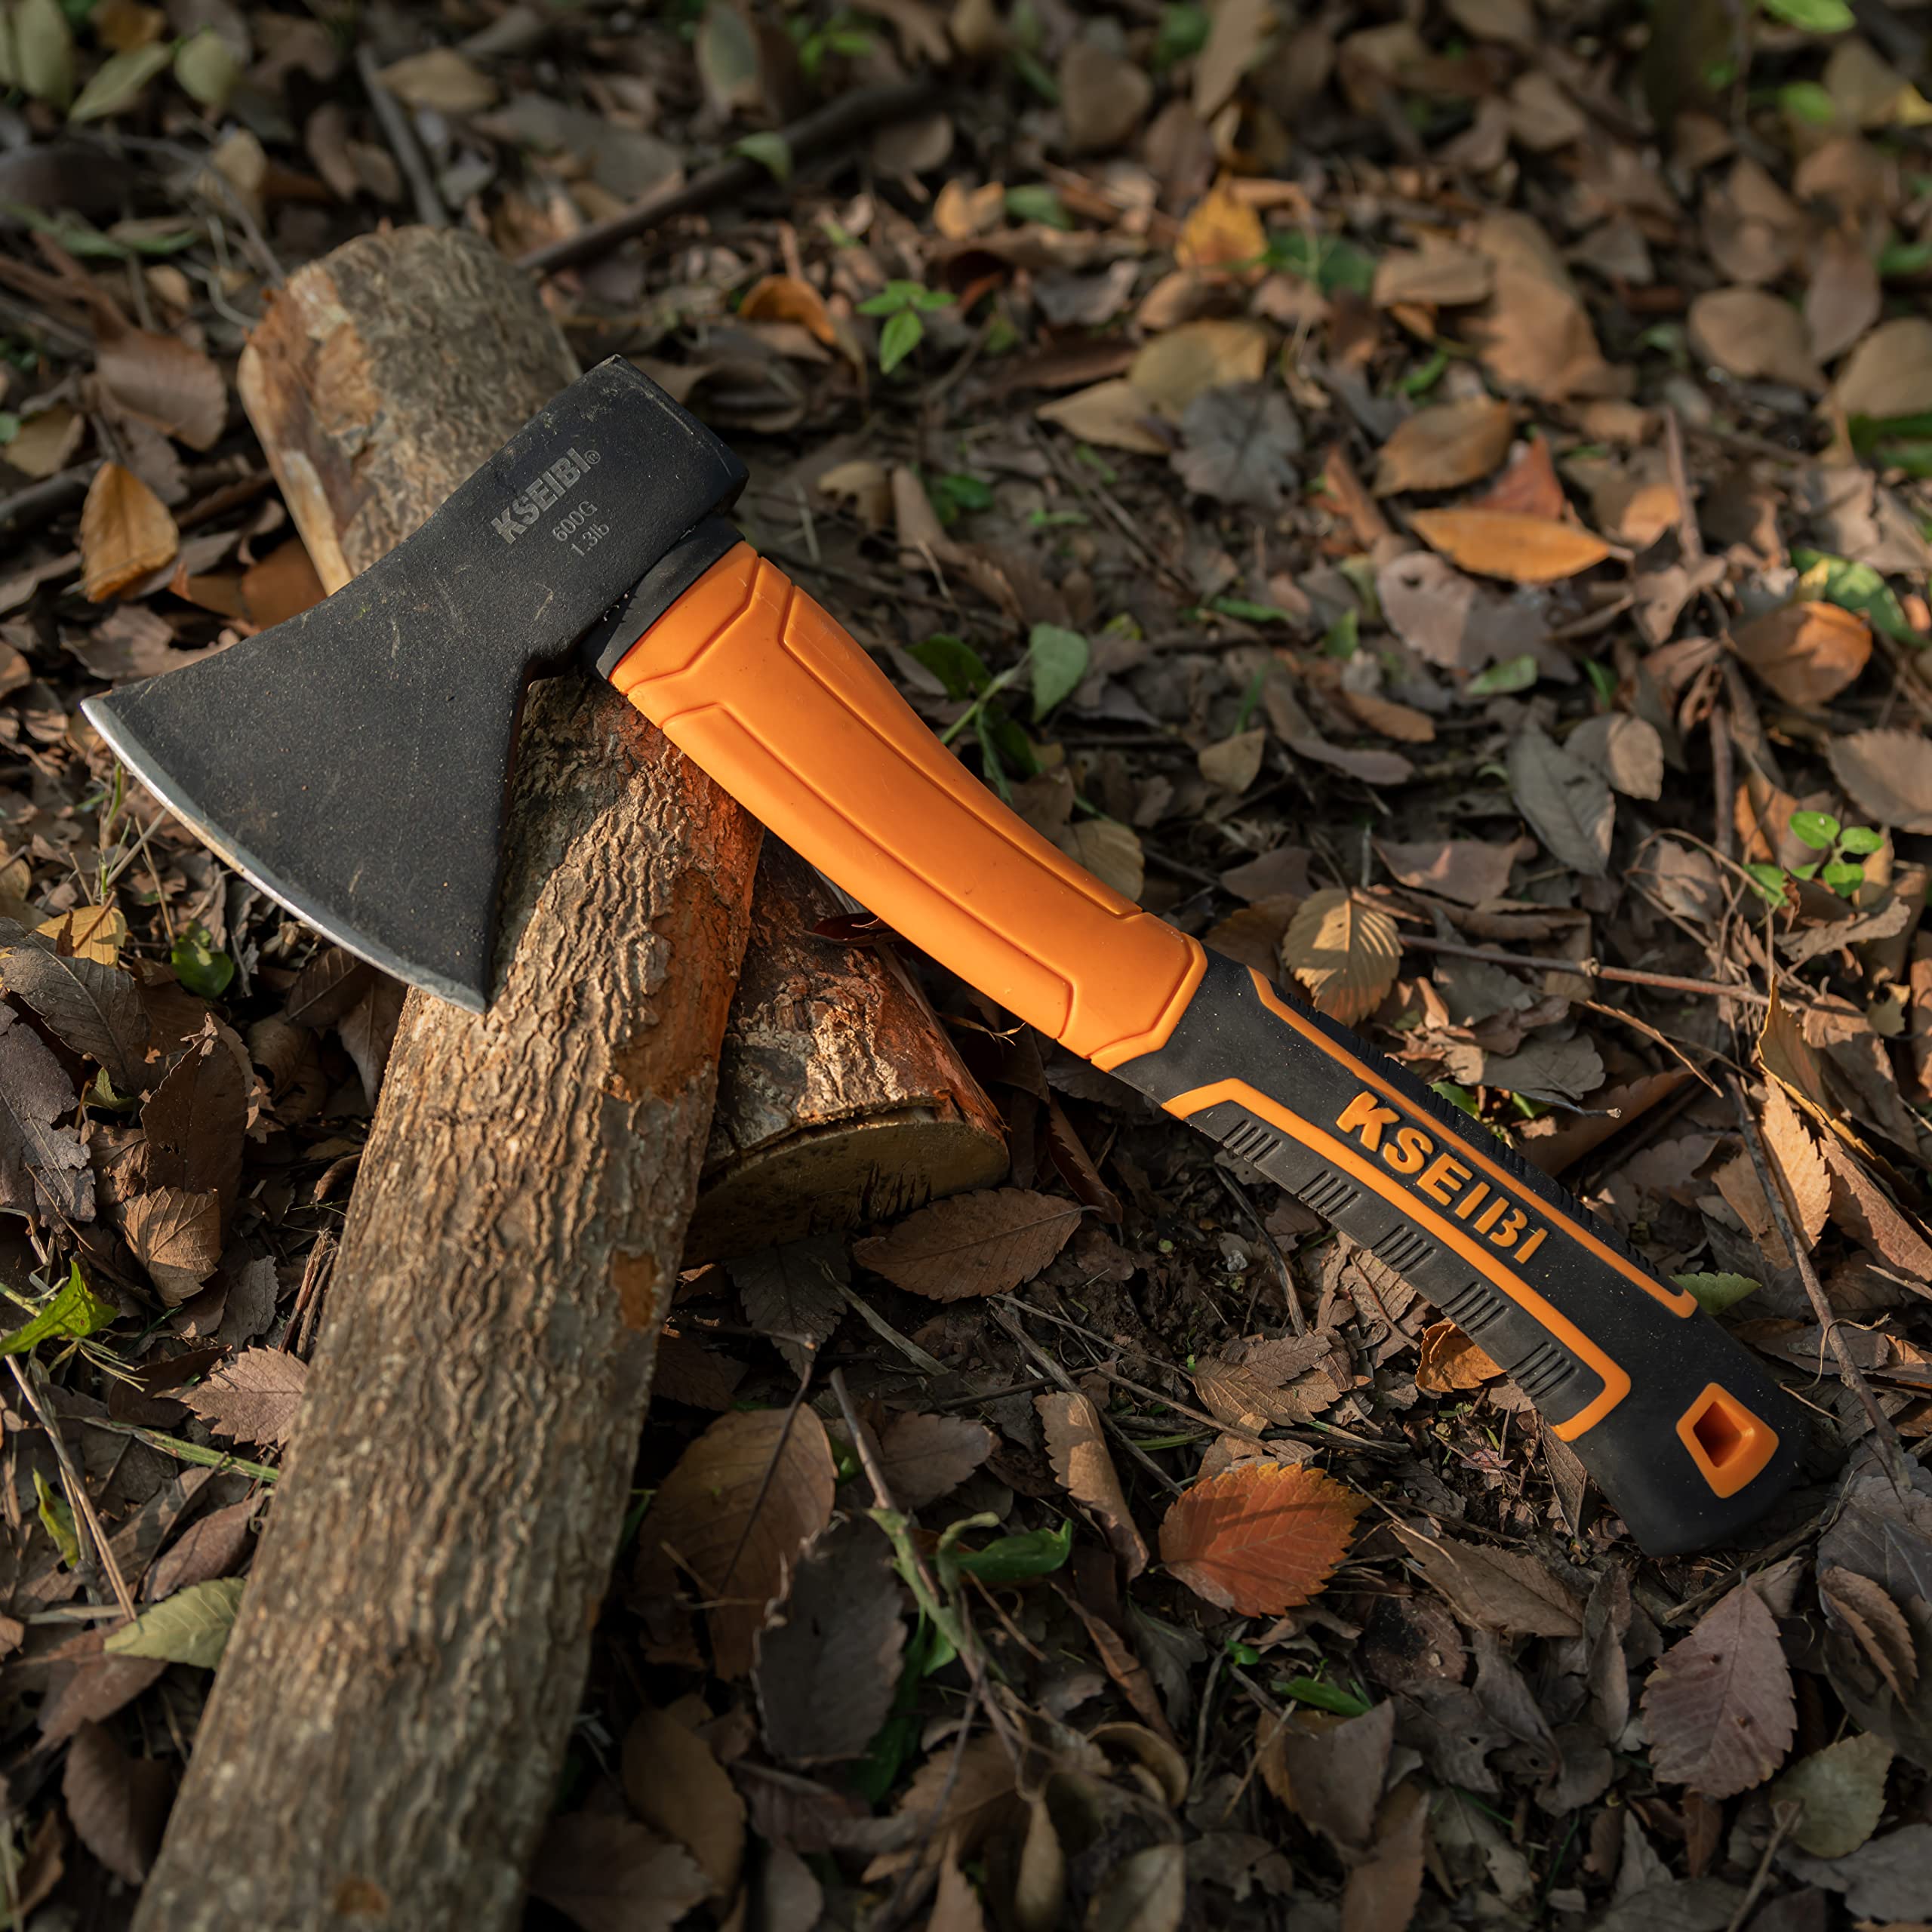 KSEIBI Wood Axe, Small Outdoor Camp Hatchet for Splitting and Kindling Wood, Forged Steel Blade with Anti-Slip and Shock Reduction Handle Great Throwing Axes and Hatchets (Modern)